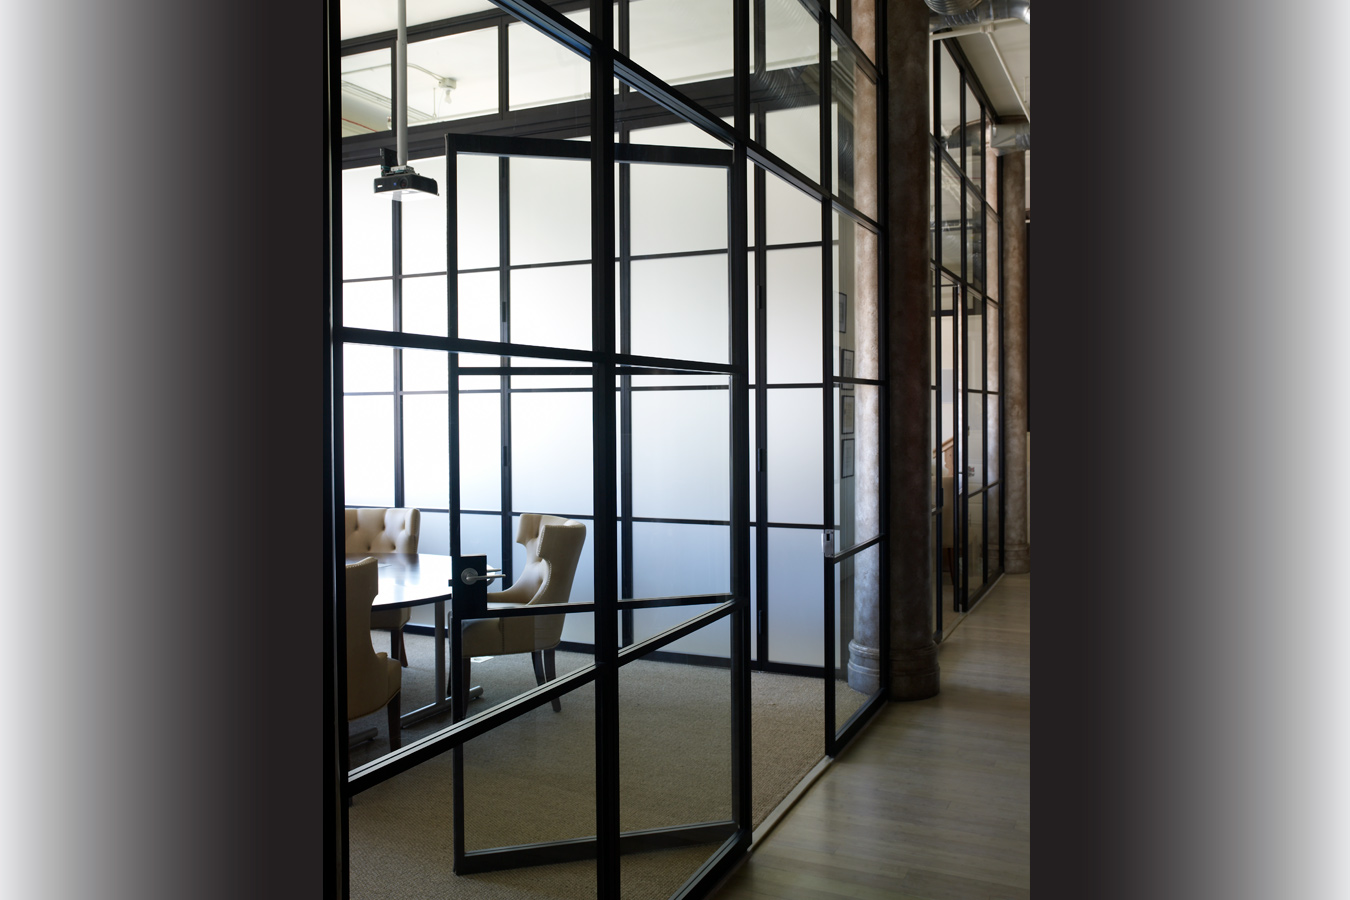 Interior Space Management | David Easton and Eric J Smith Architect, Union Square, NYC | Fixed Panels, Swing Doors, Folding Wall